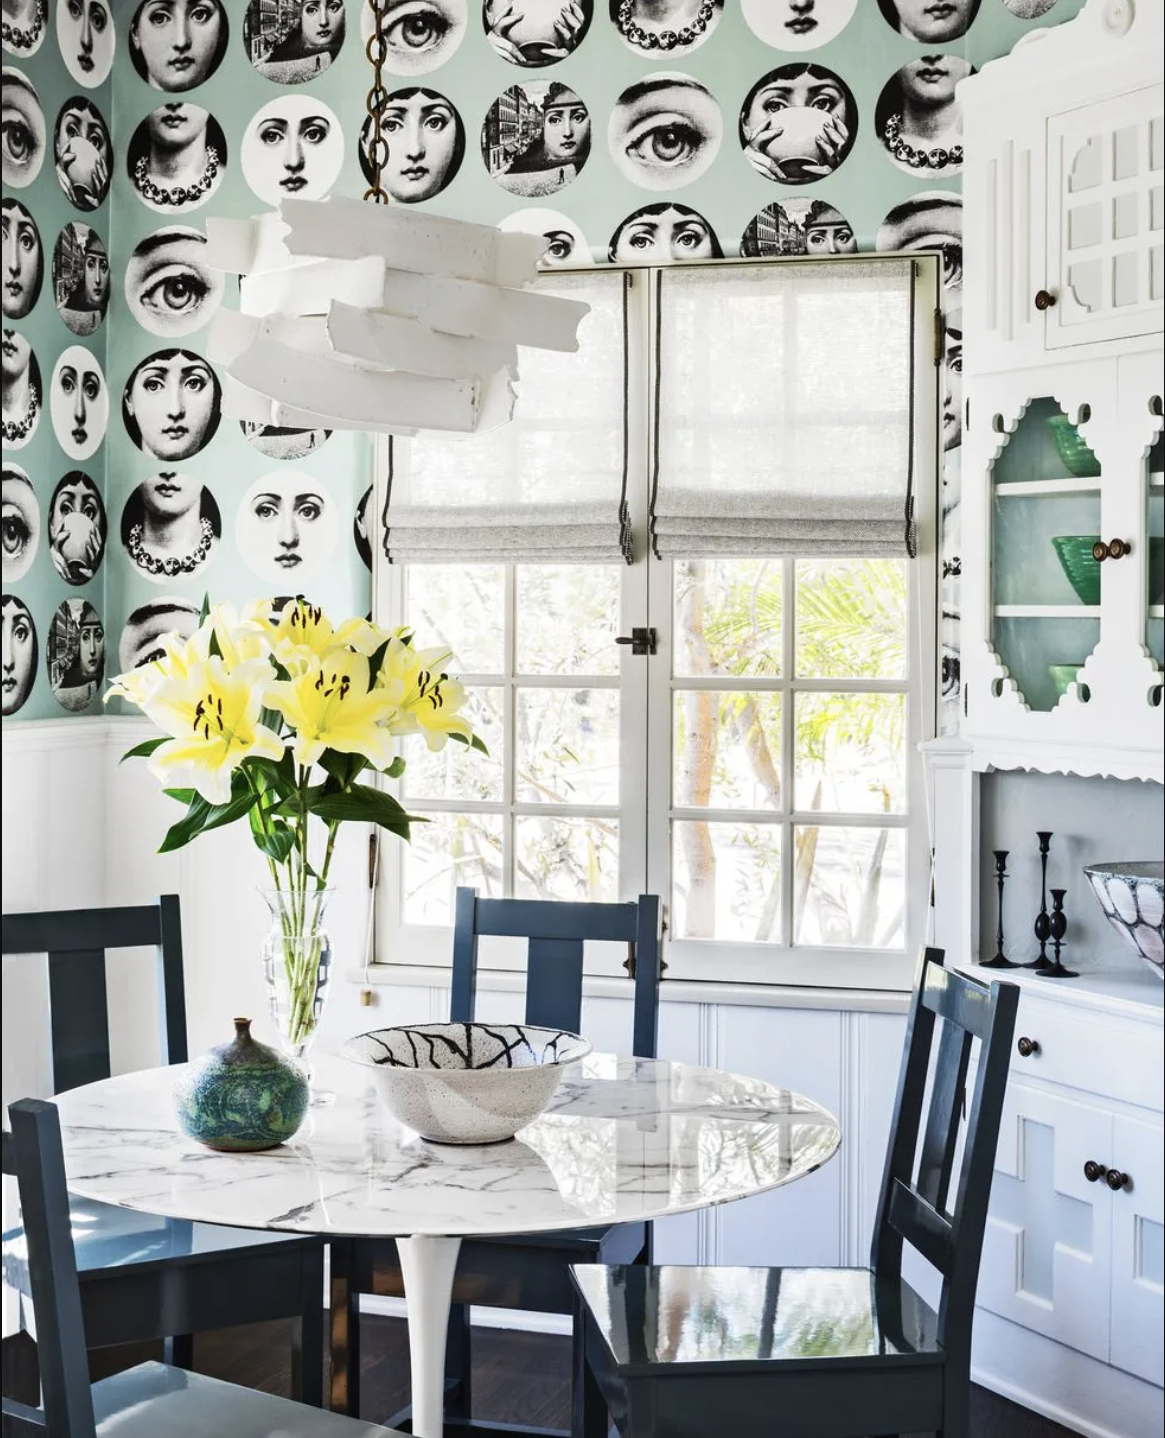 9 Of The Best Kitchen Wallpaper Designs  I Want Wallpaper